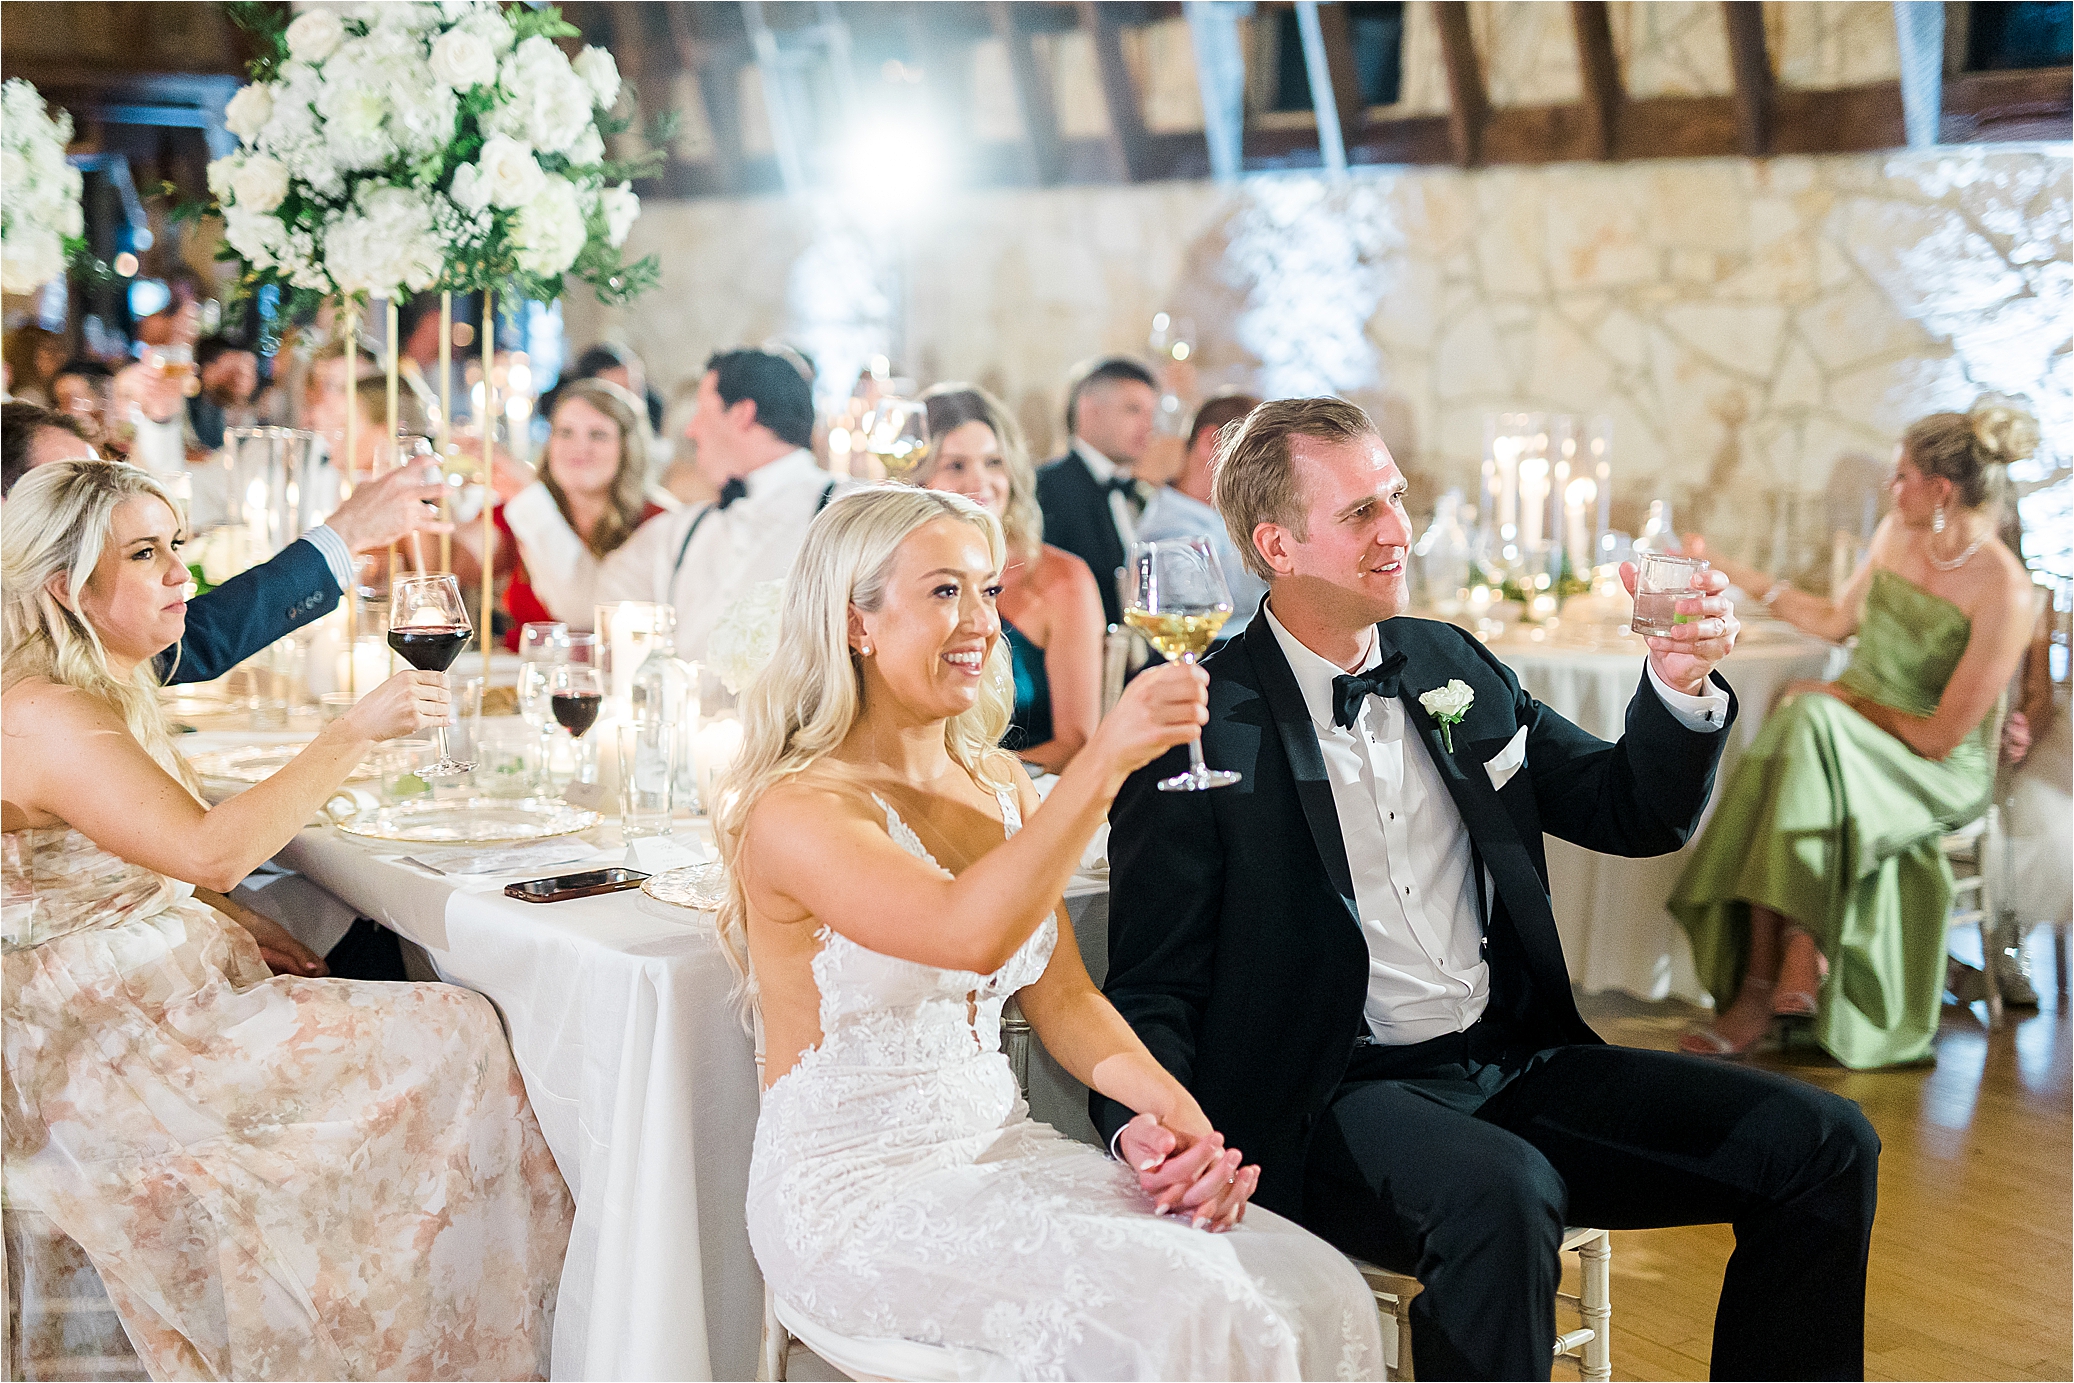 A bride and groom hold their drinks and cheers as they hold hands at their wedding reception in Austin, Texas